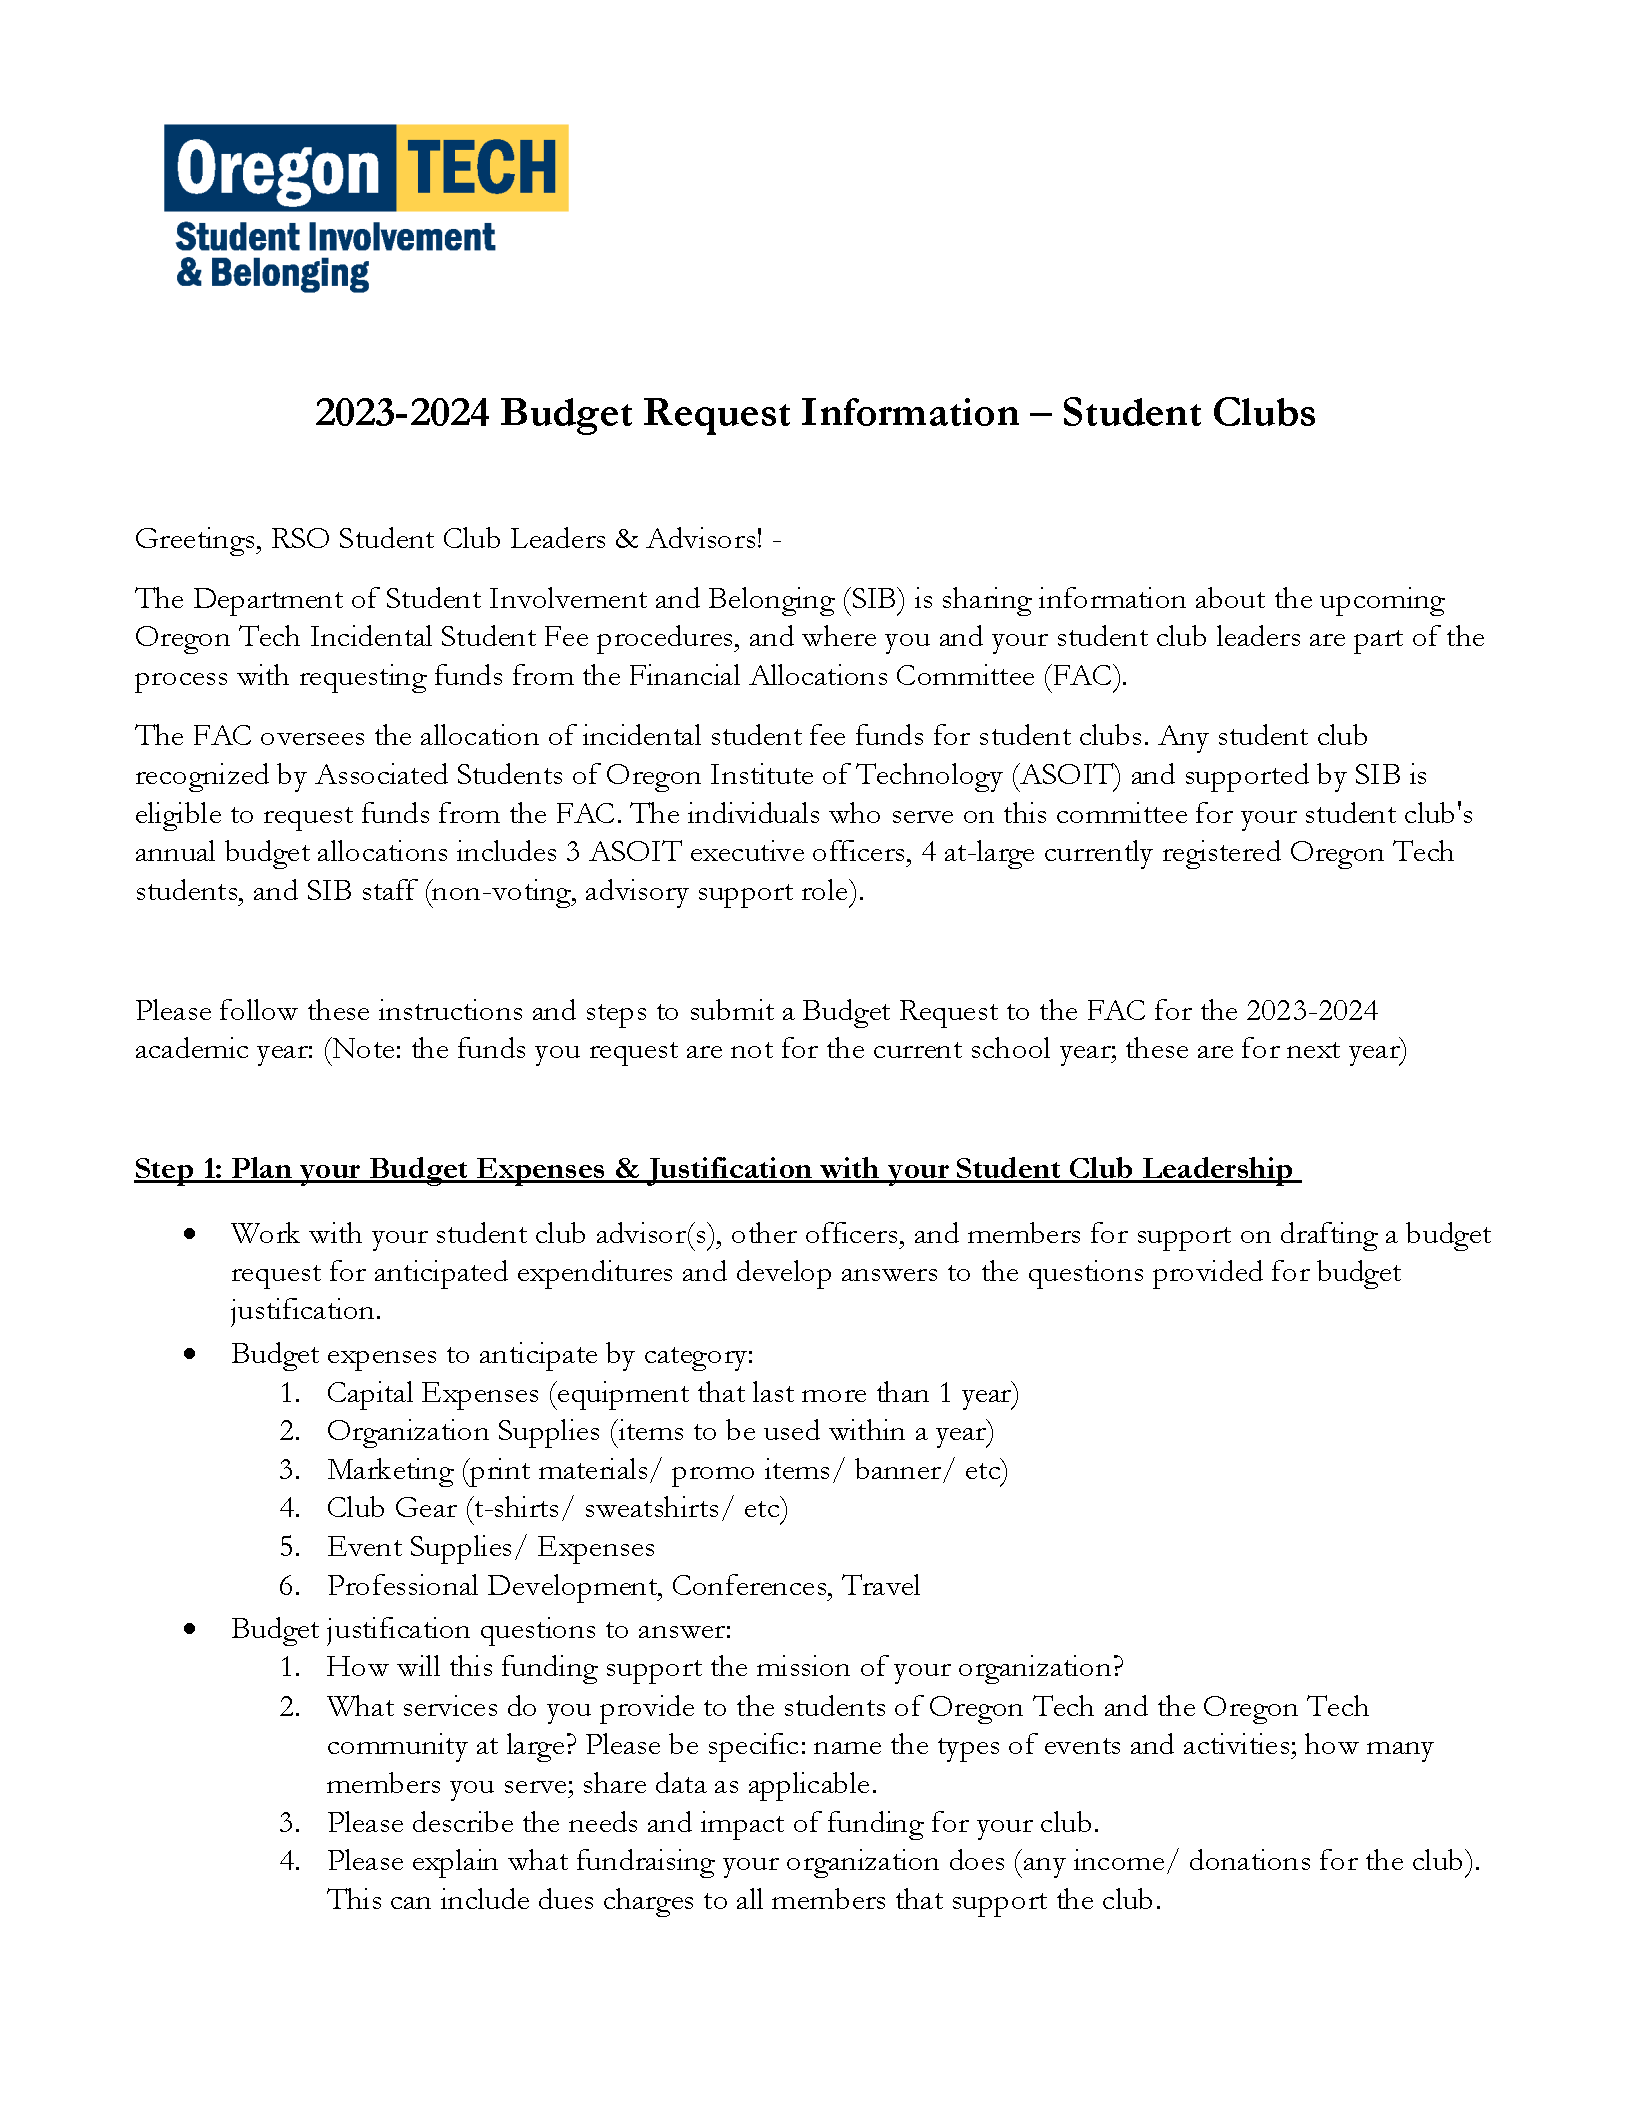 Link opens a PDF of the 2023-2024 Budget Information – Student Clubs information page.